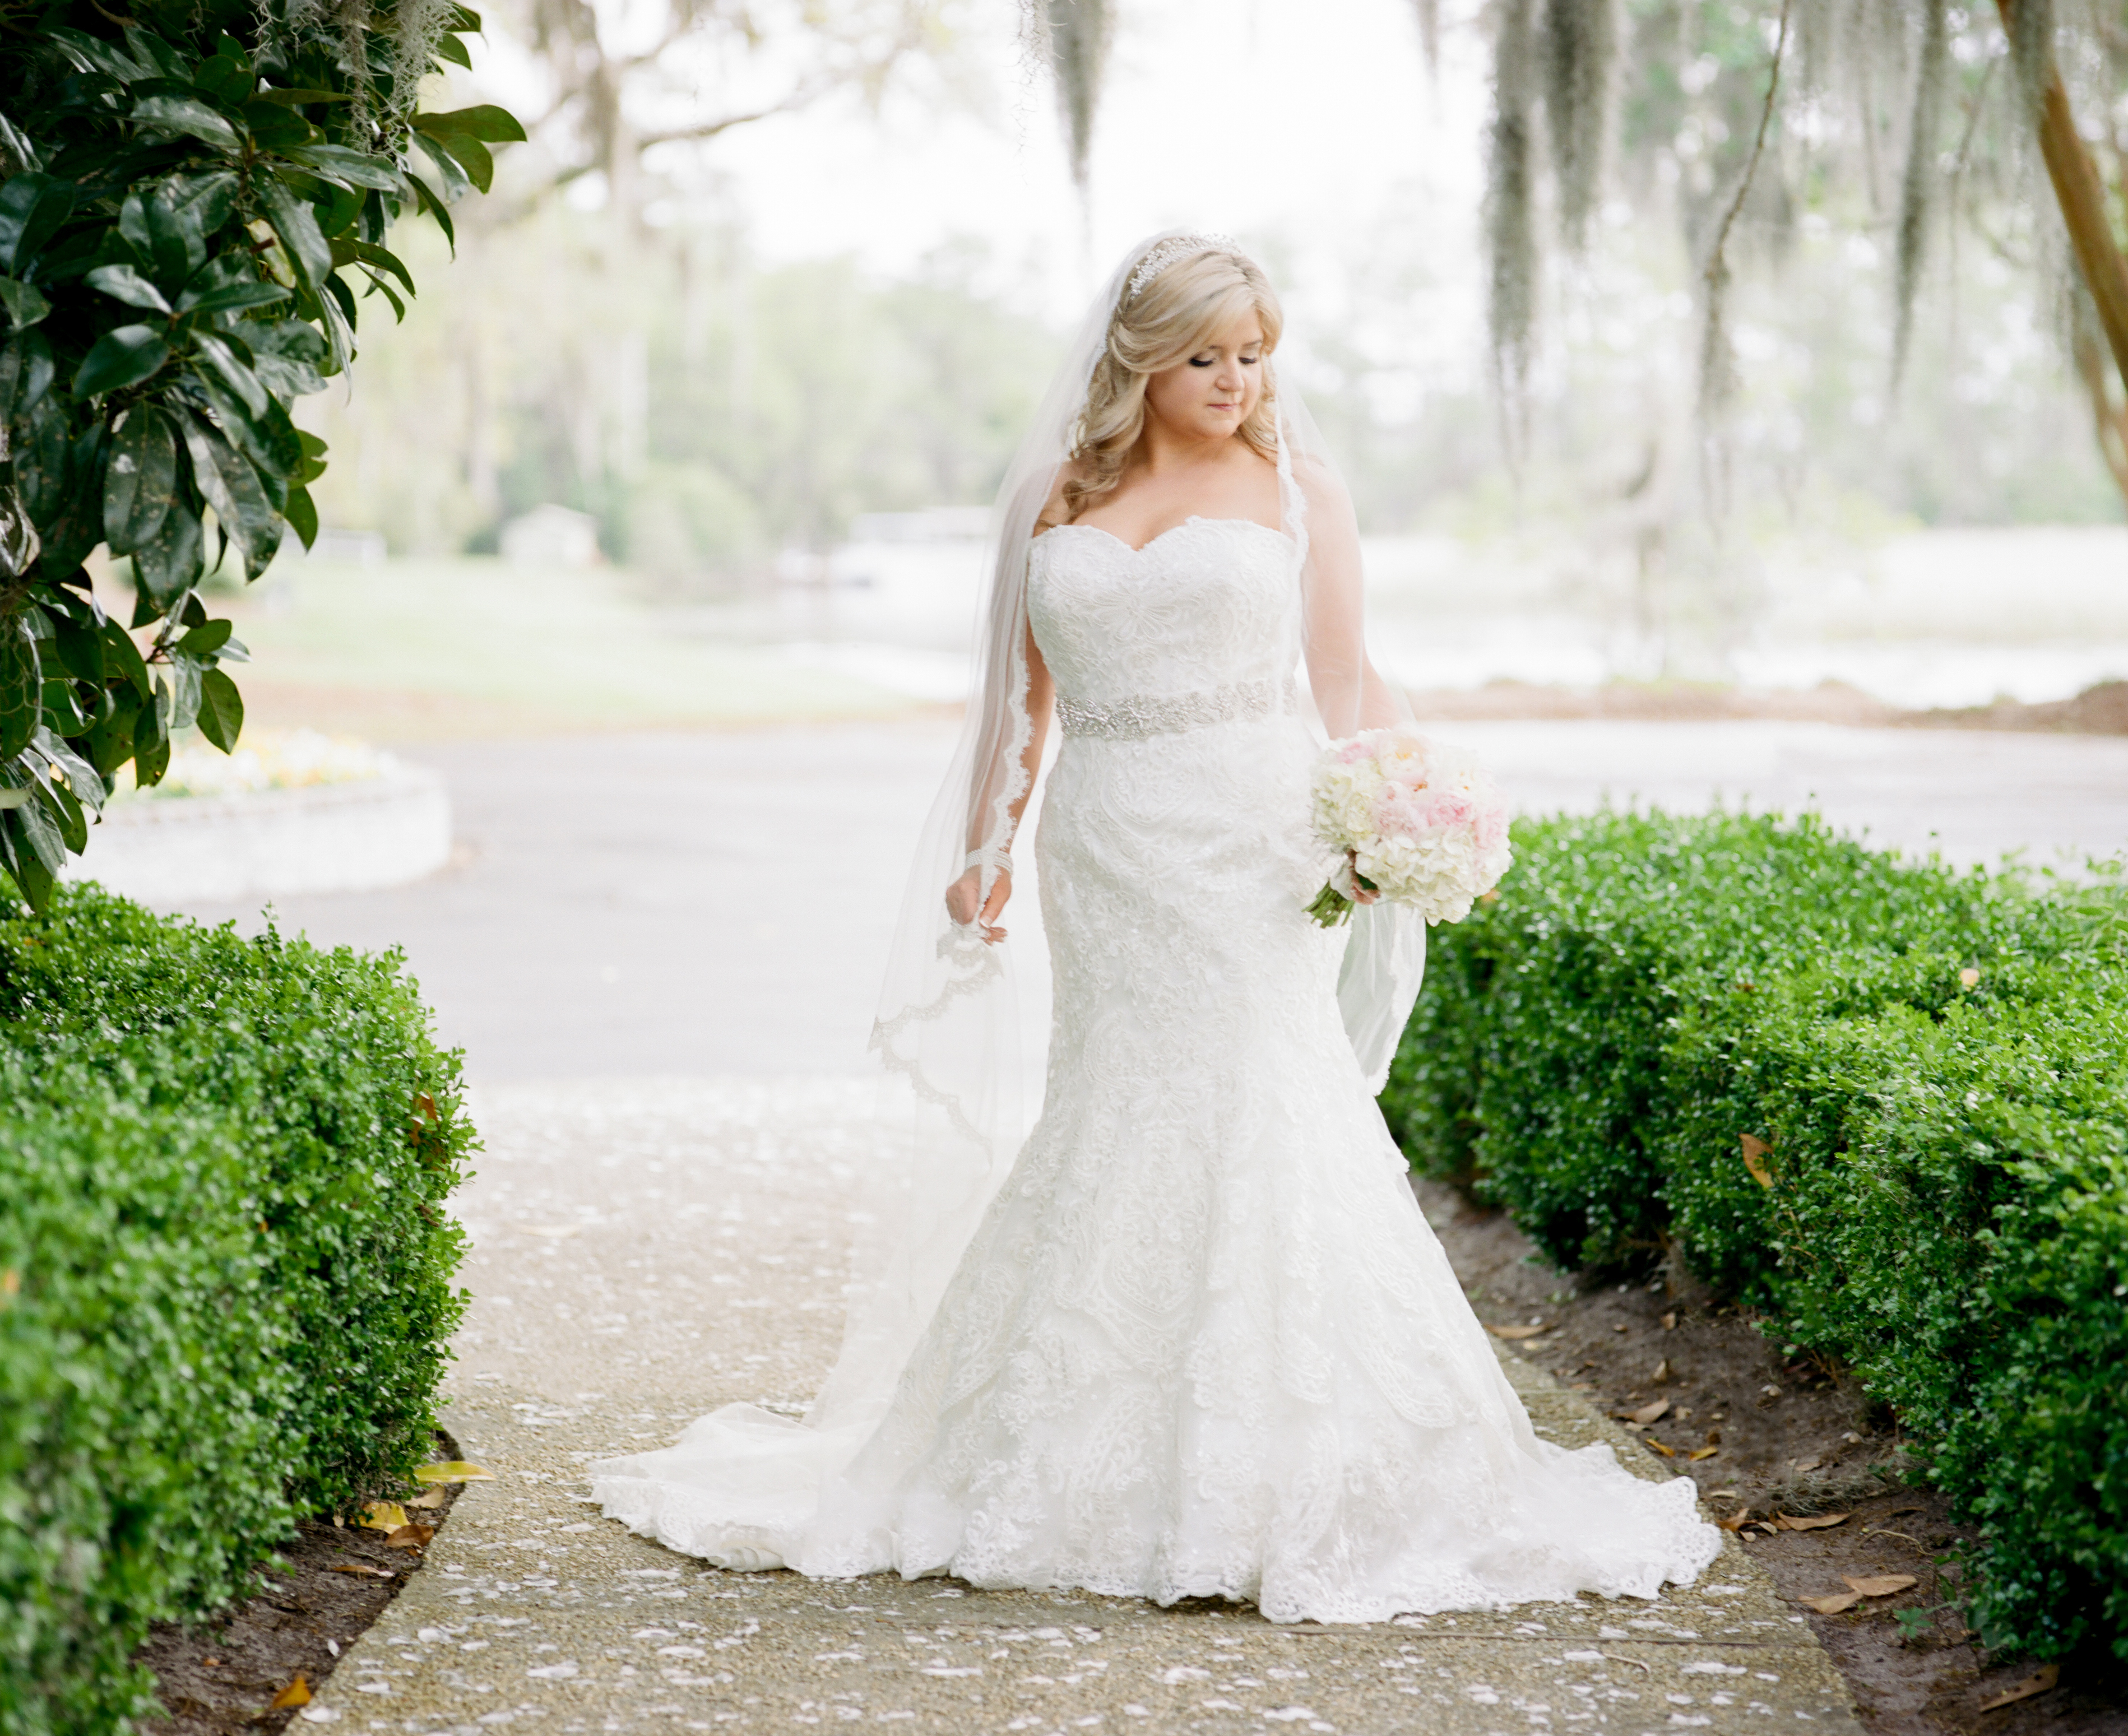 southern wedding traditions bride in gown photo